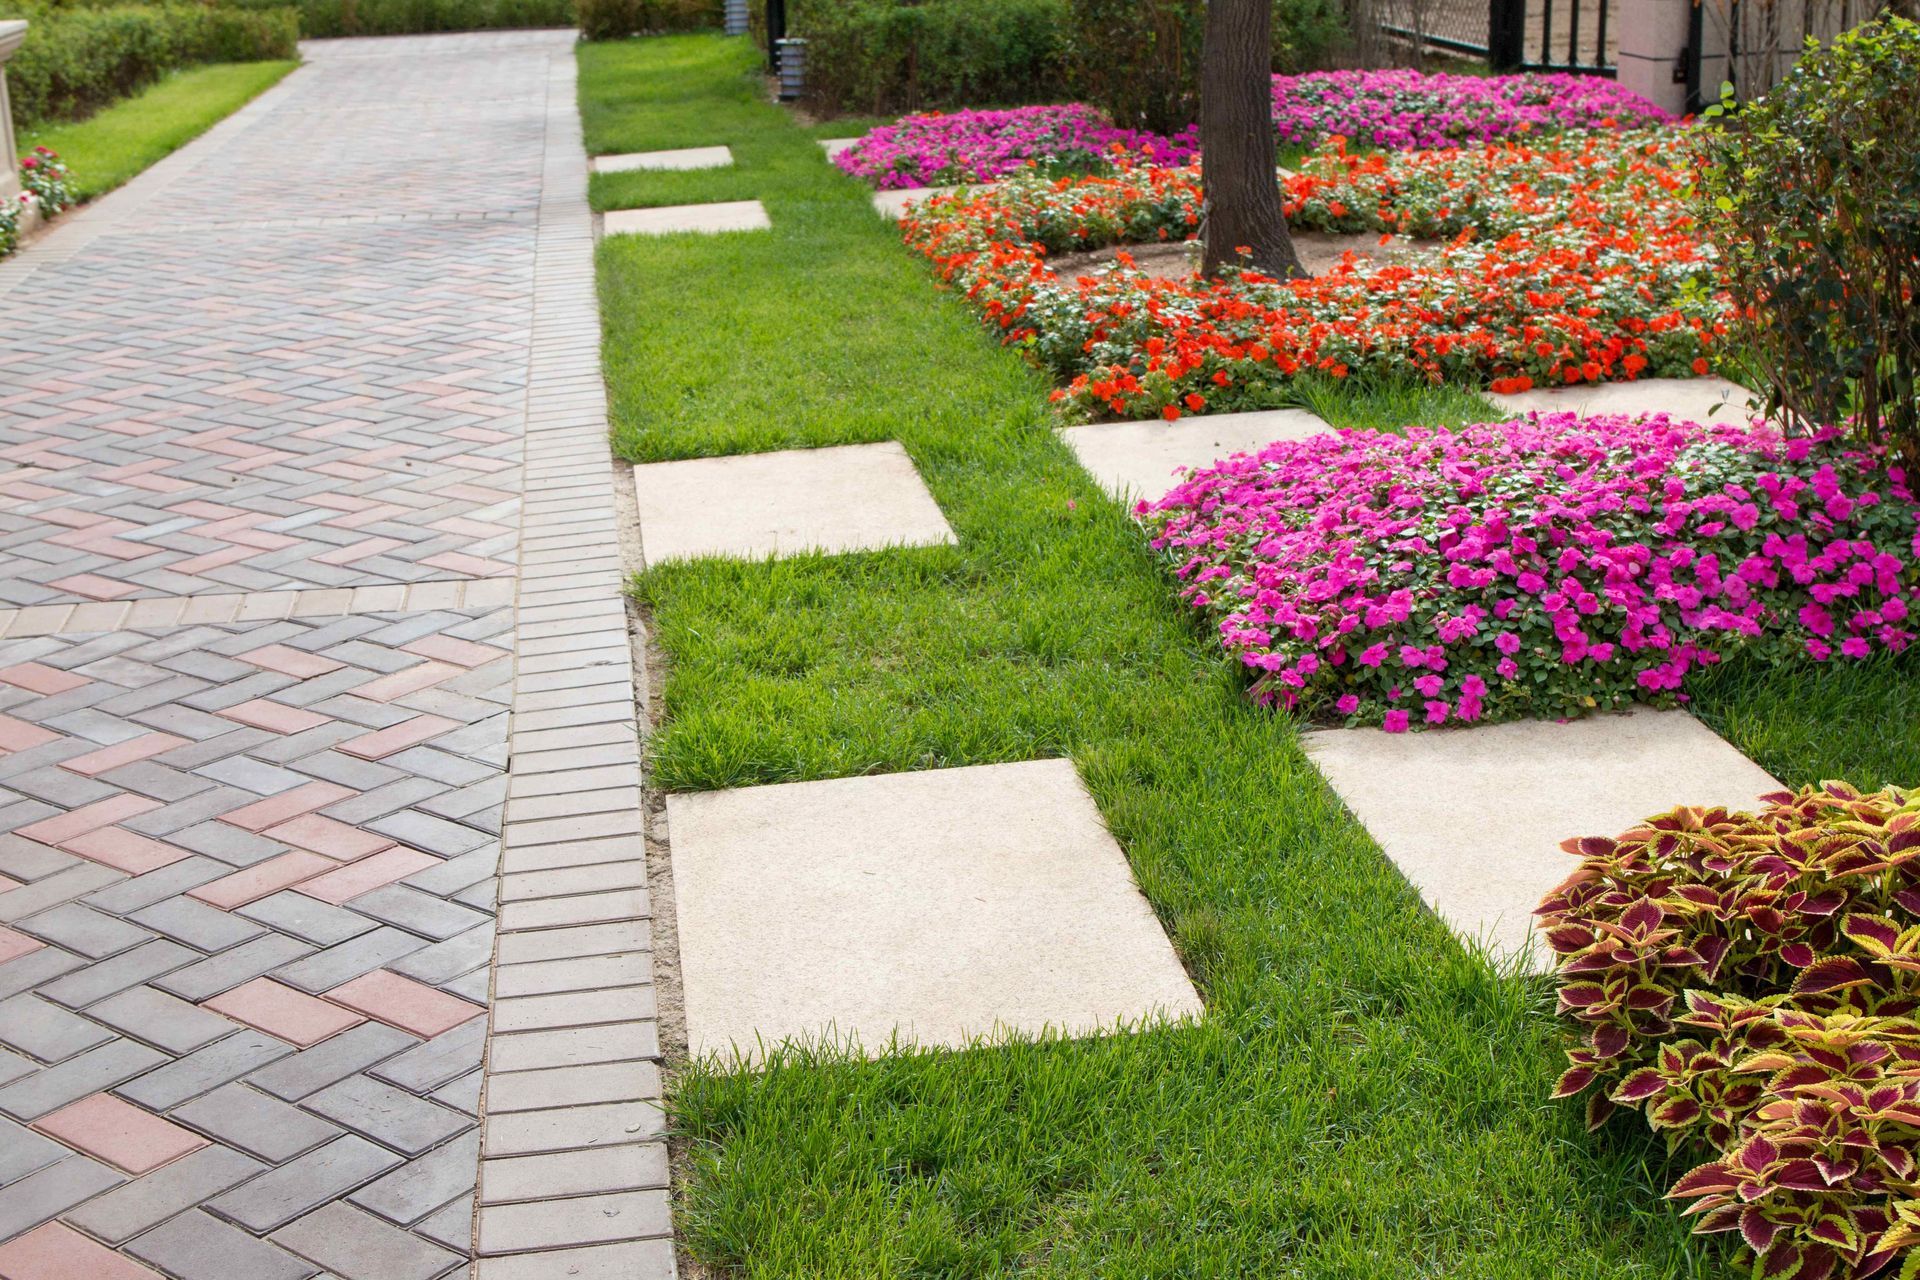 Hardscaped paver path next to a meticulously maintained flowerbed design by affordable landscapes CC